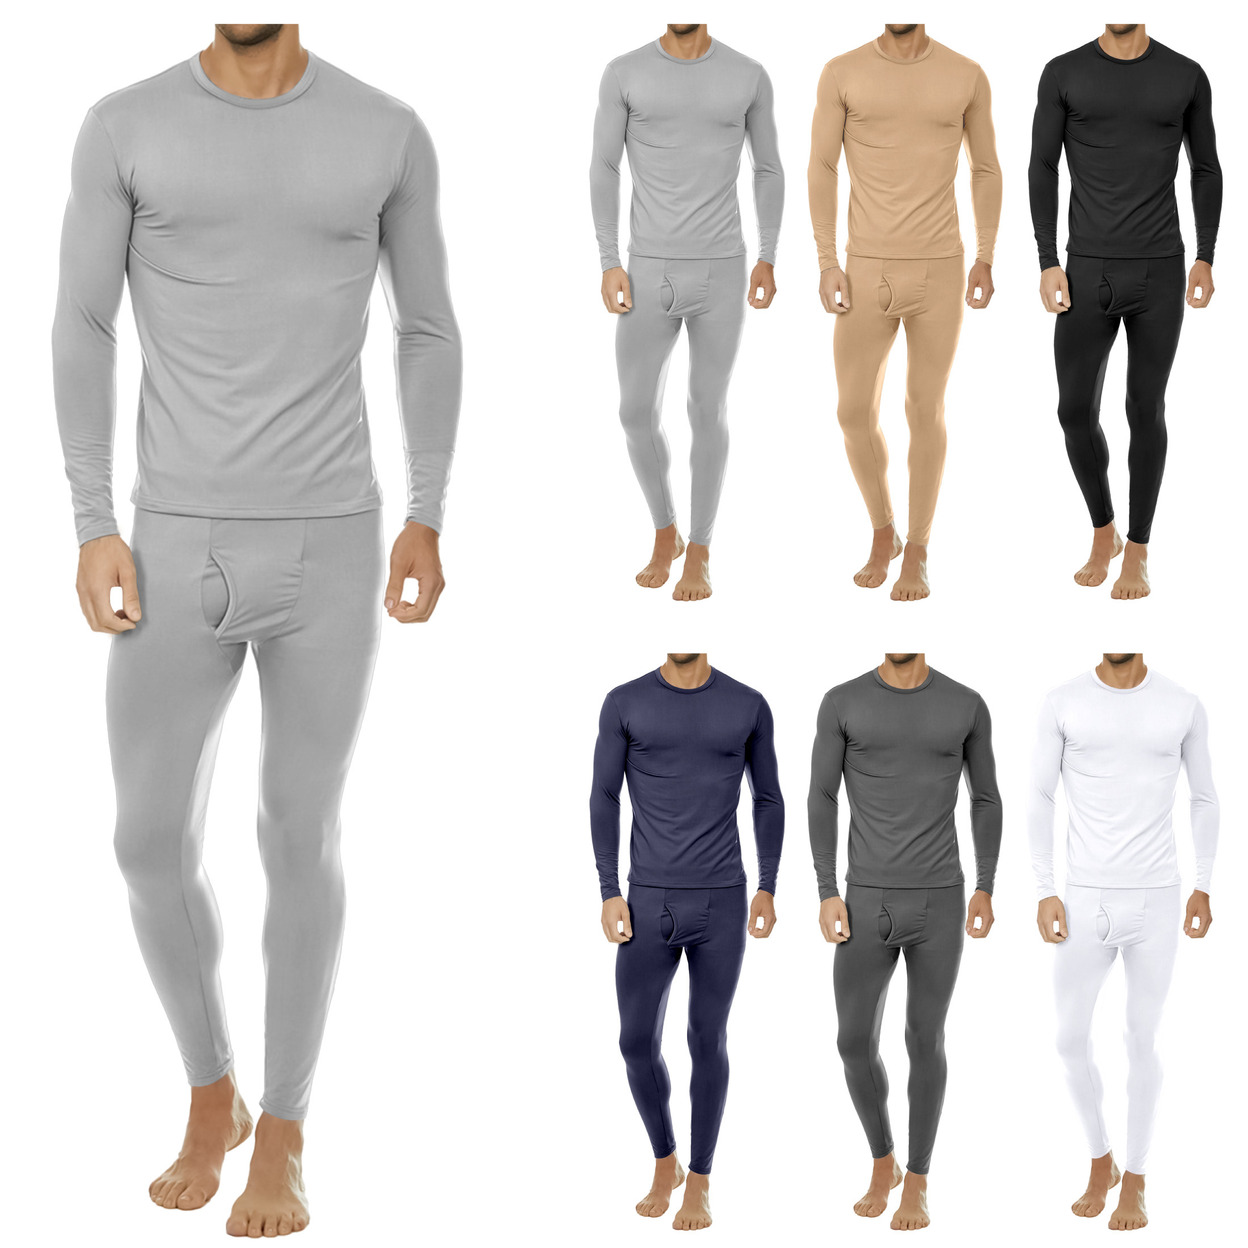 2-Sets: Men's Winter Warm Fleece Lined Thermal Underwear Set For Cold Weather - Grey&grey, Xx-large